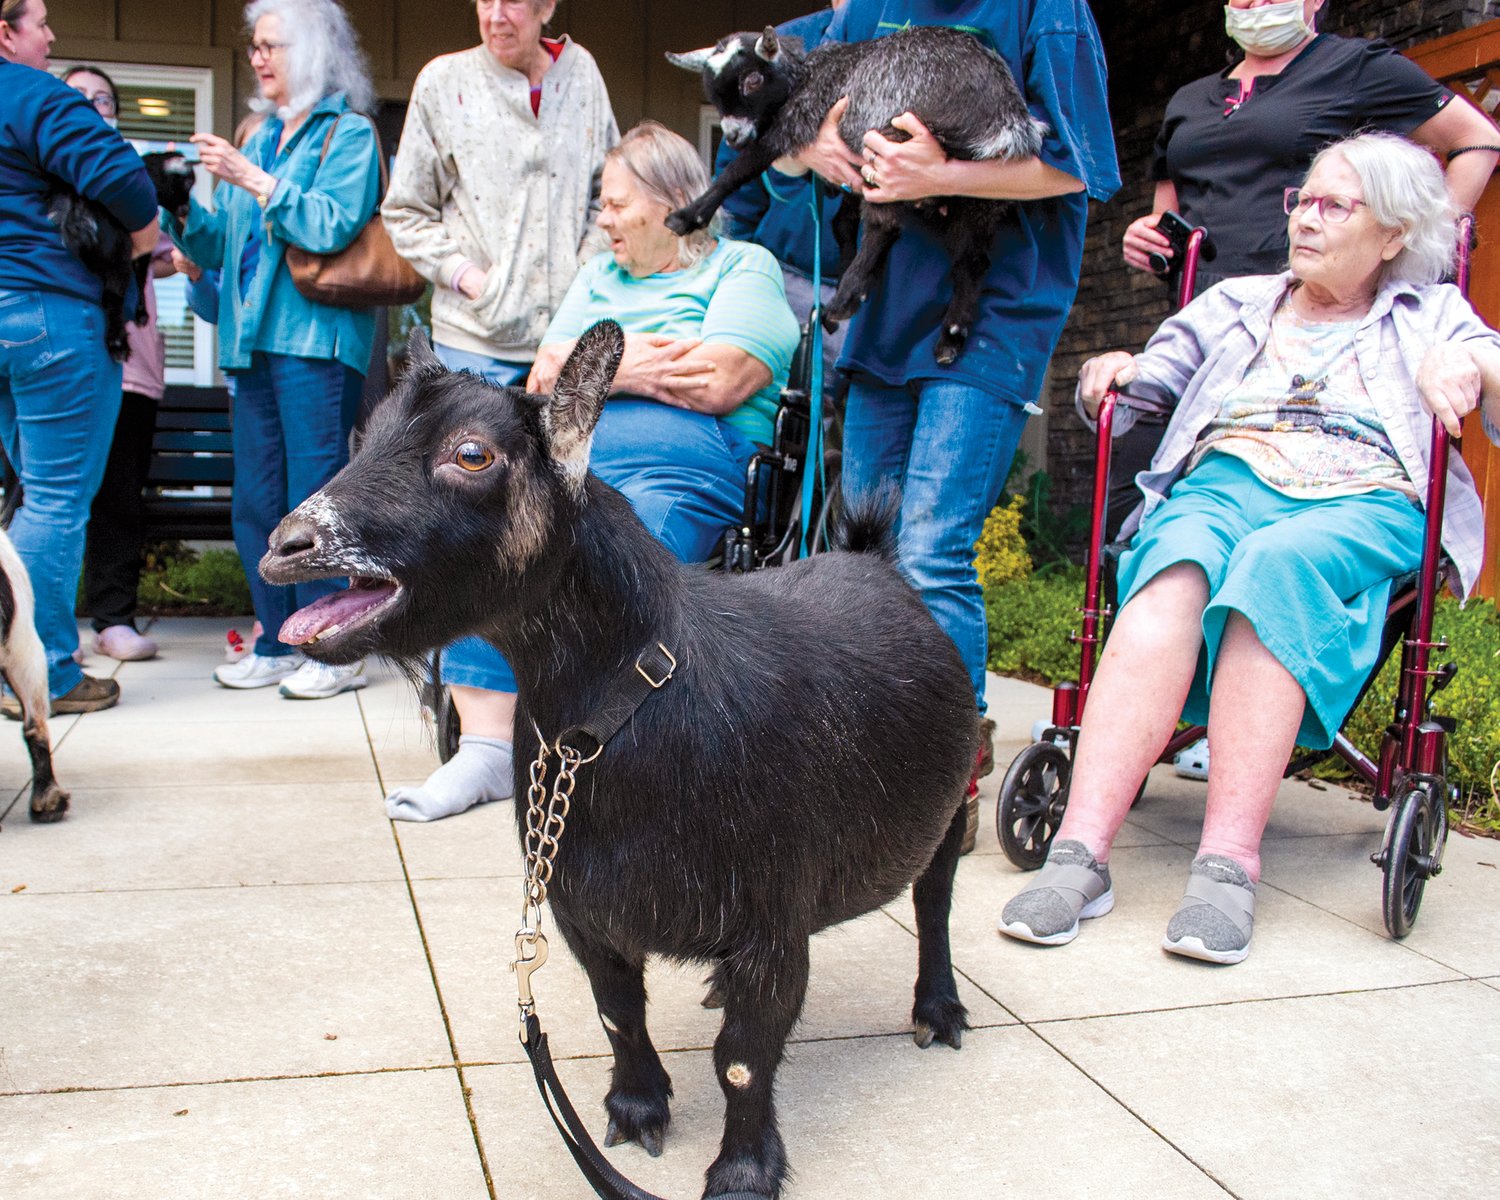 Rain, a pygmy goat, sounds off at Woodland Village Concepts of Chehalis Thursday afternoon while visiting residents and staff with her baby Luna.